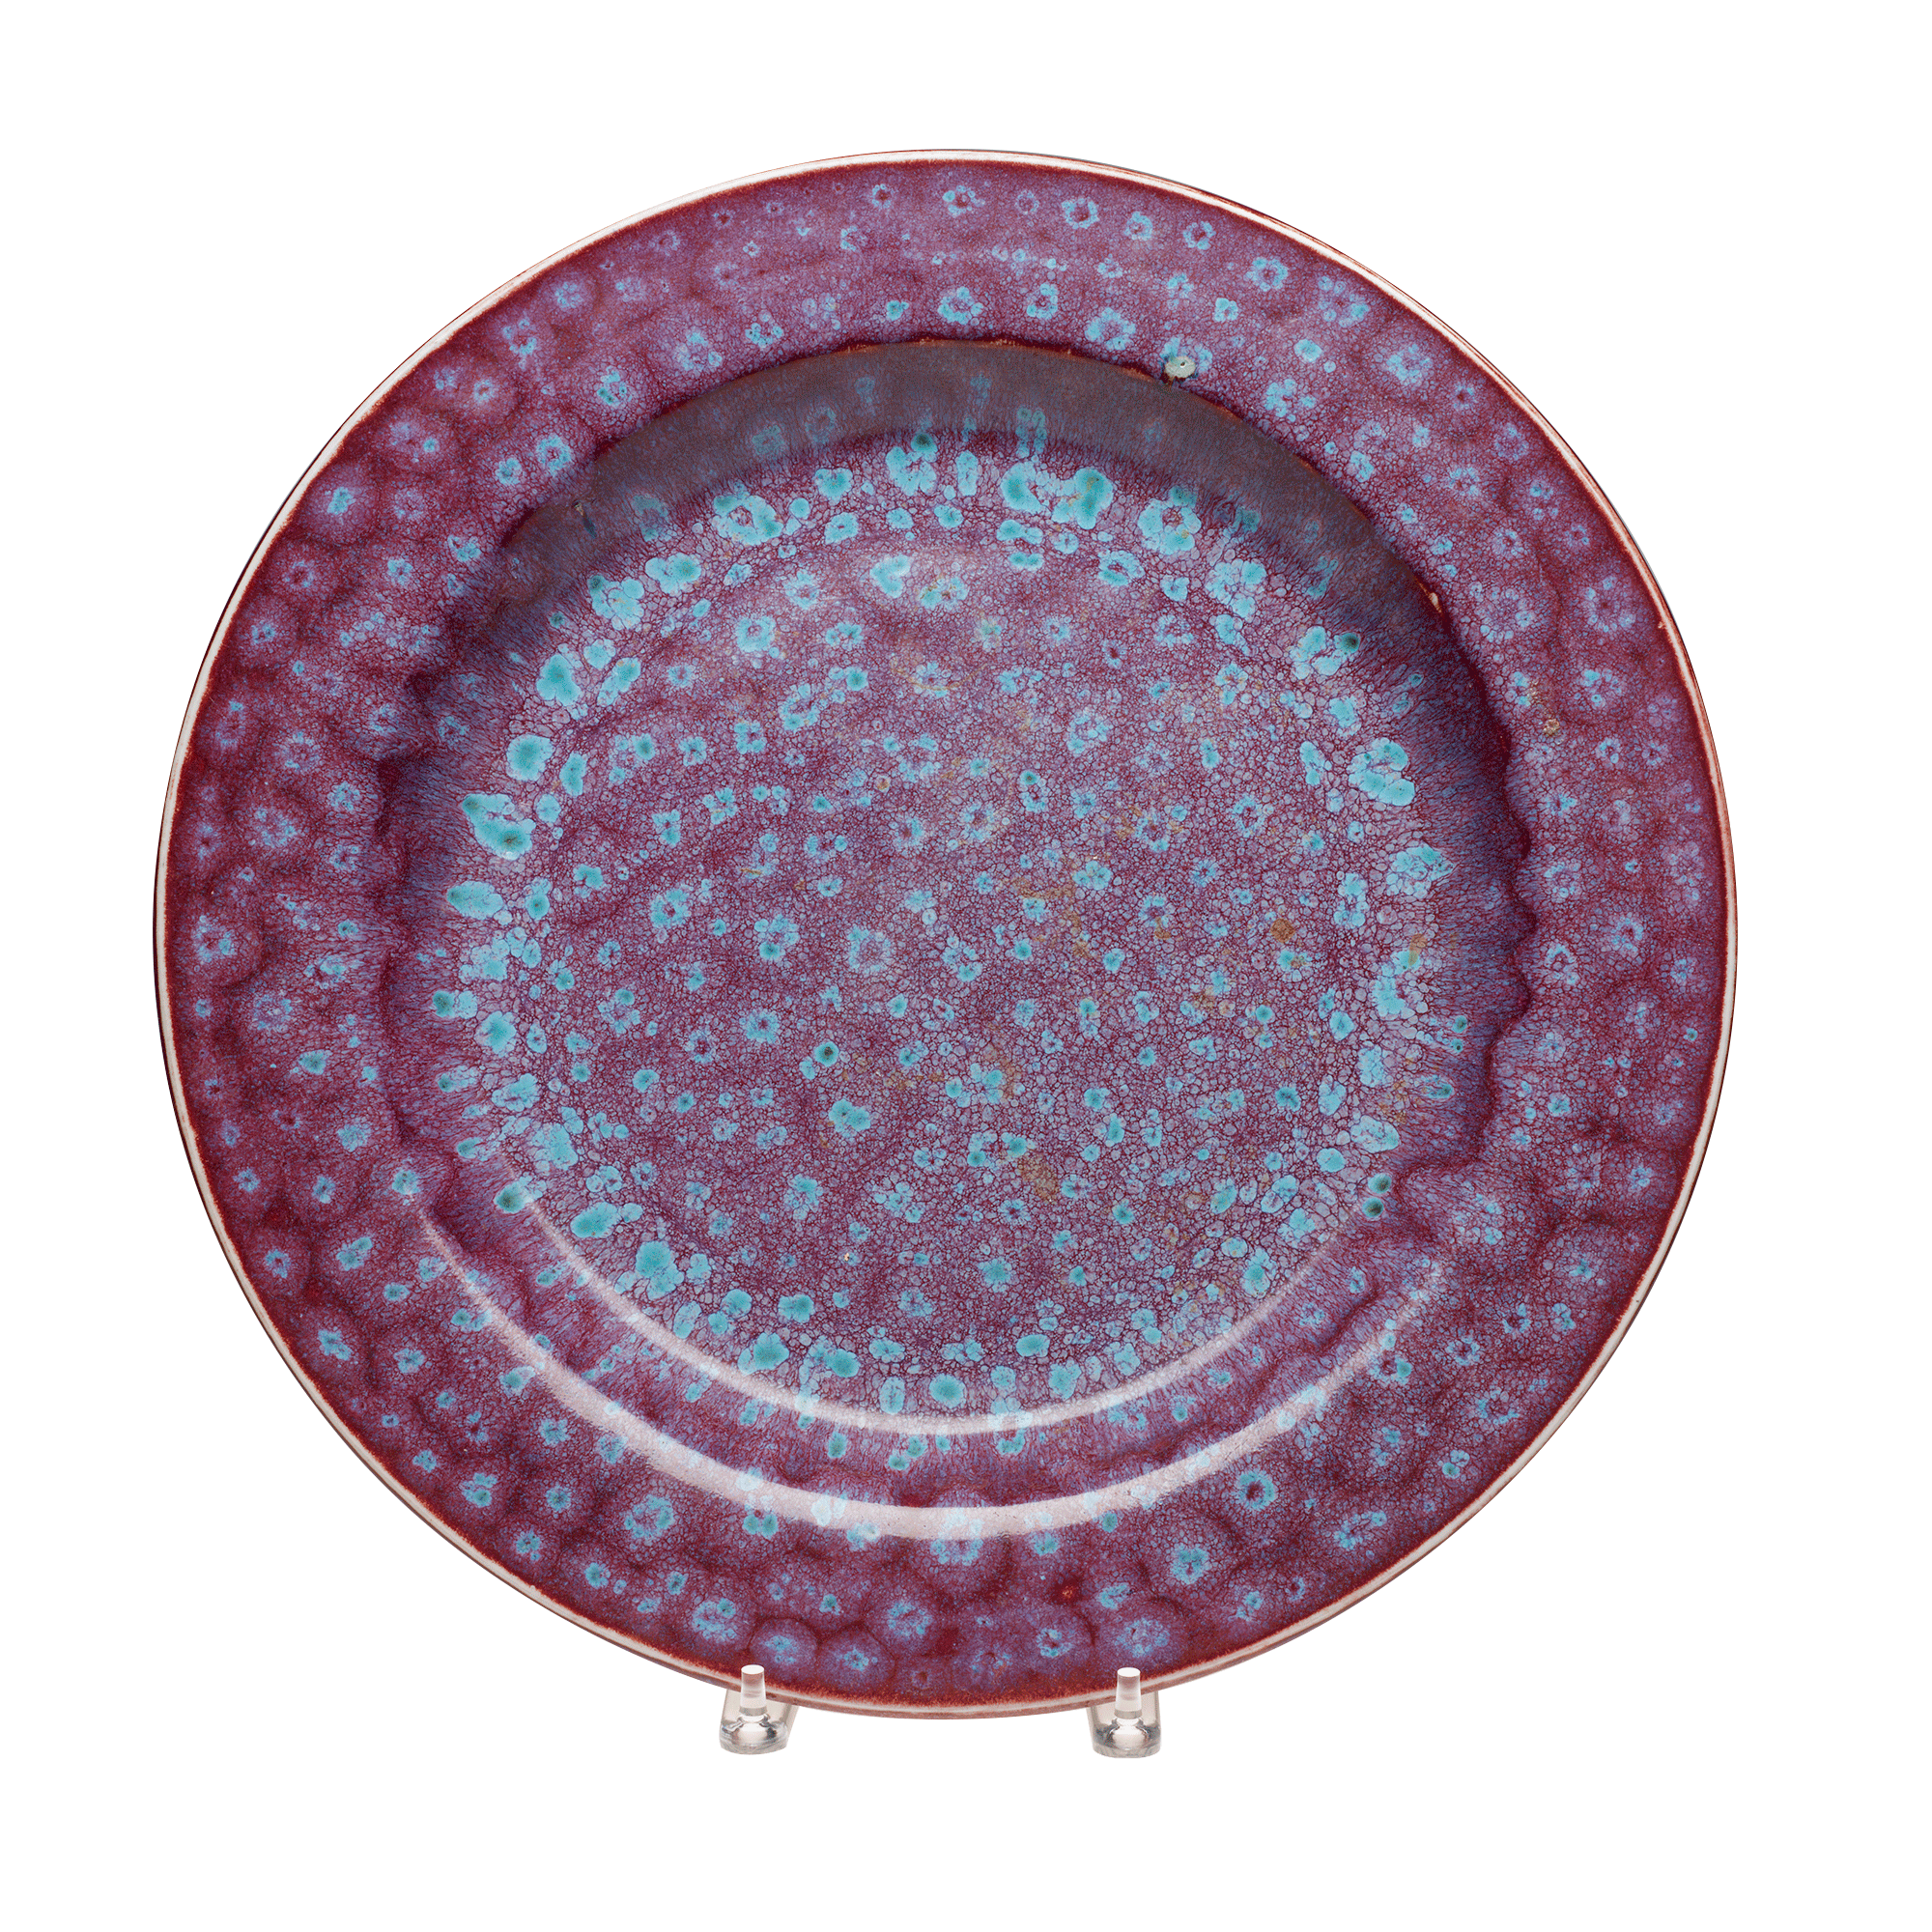 /Circular%20plate%20with%20dark%20purple%20glaze%20and%20spots%20of%20light%20blue%20glaze%20in%20concentric%20circles.